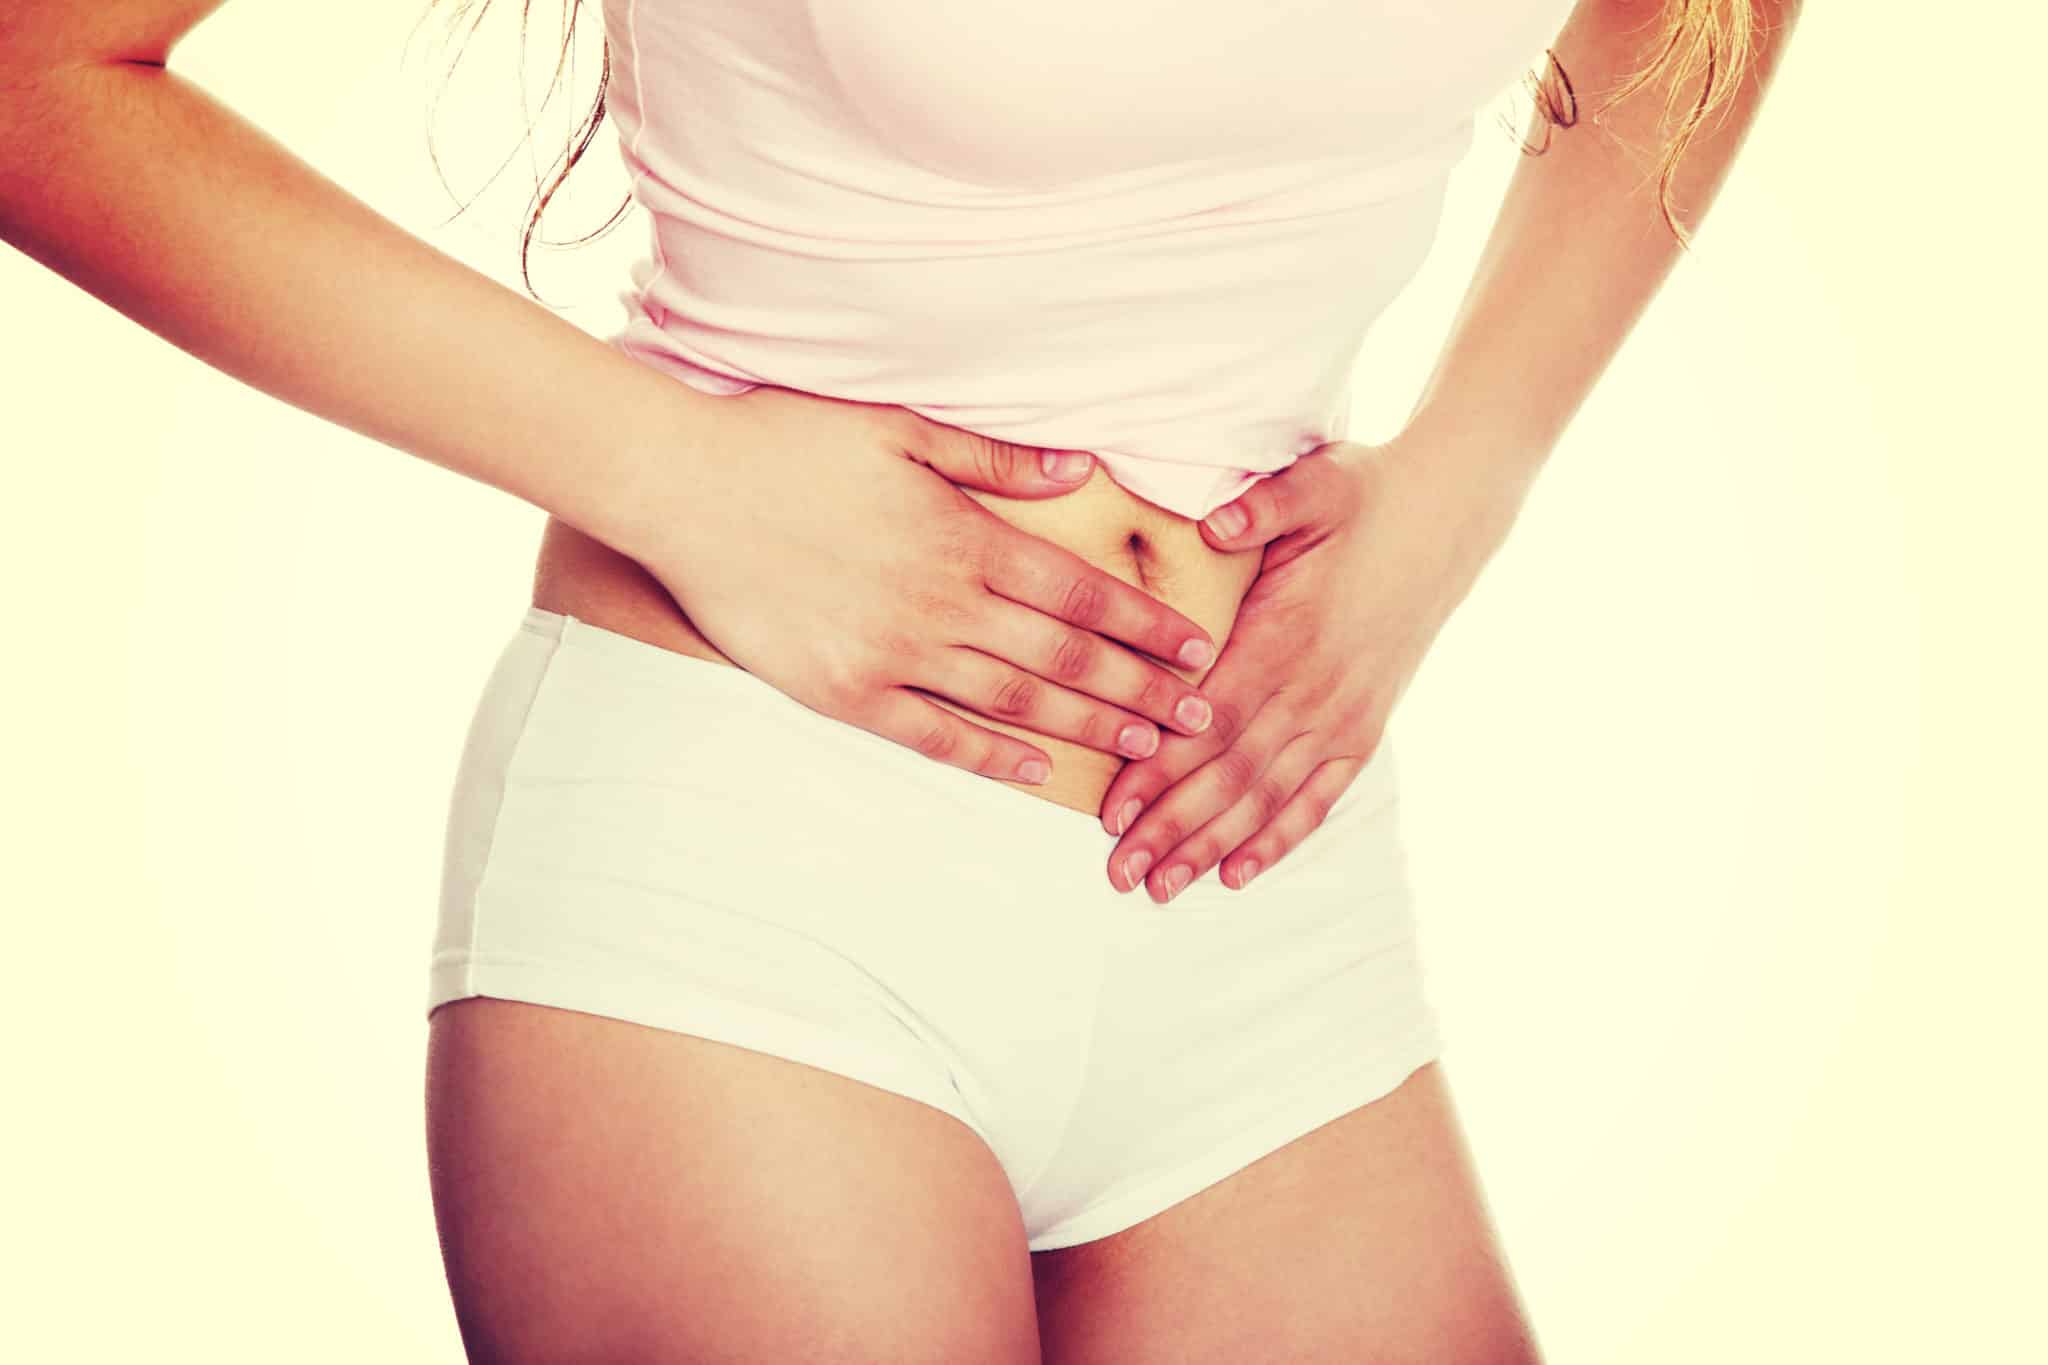 Take care of cramps, hot flashes, and PMS naturally with these healthy tips.